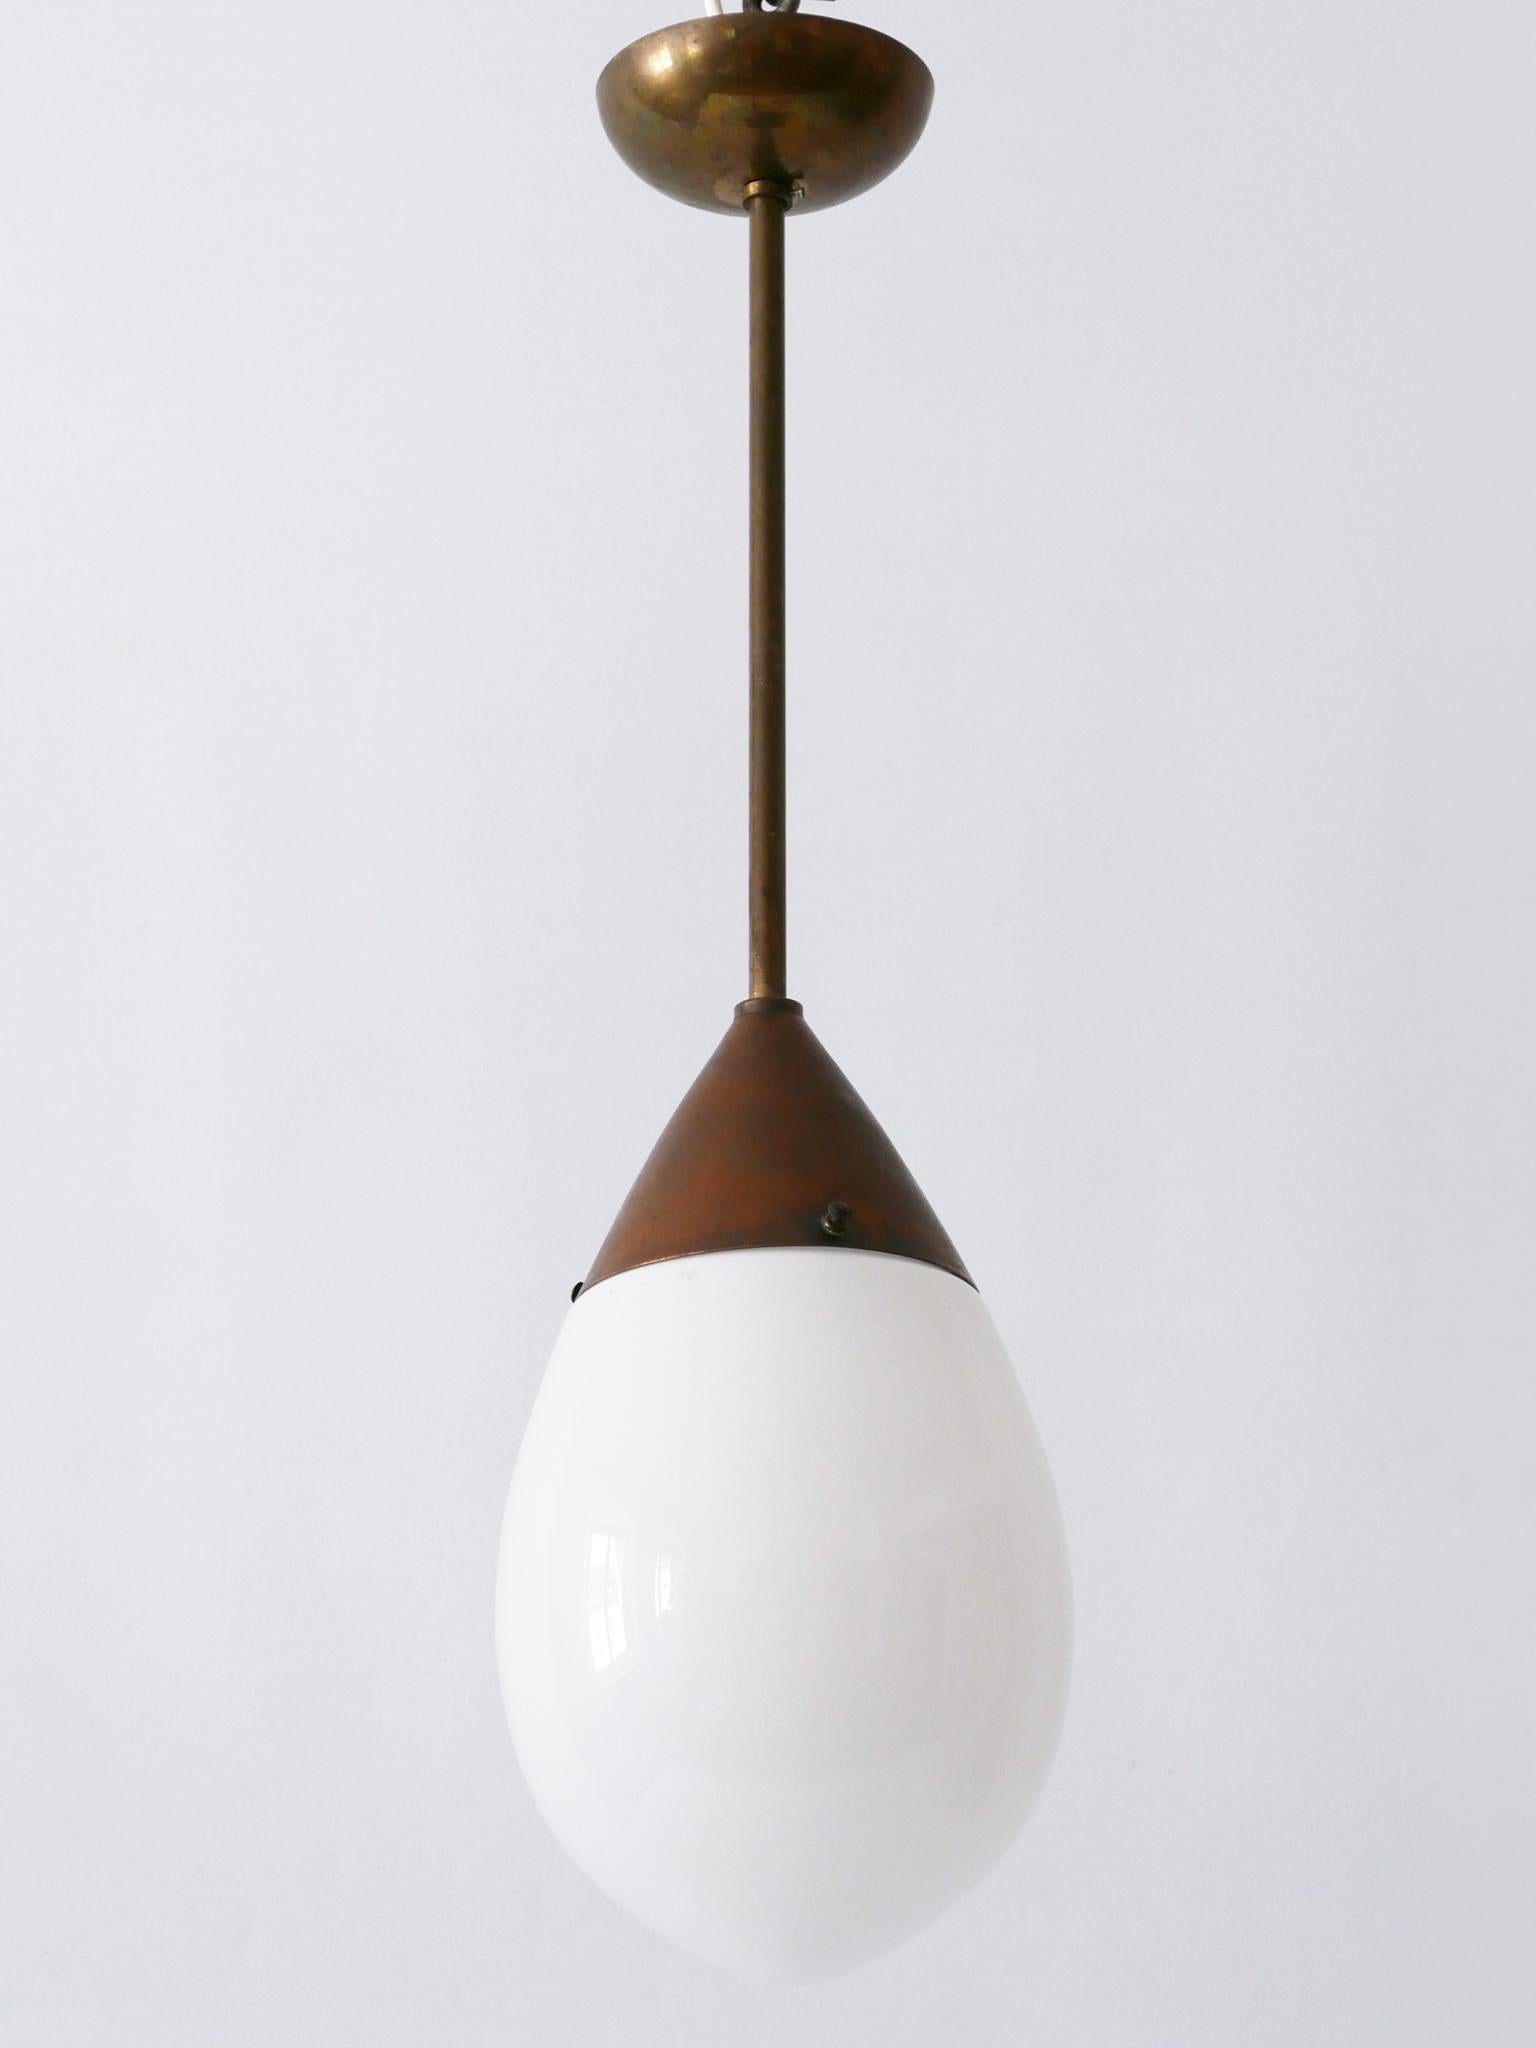 Exceptional Bauhaus Pendant Lamp or Hanging Light Drop by Siemens 1920s, Germany For Sale 4